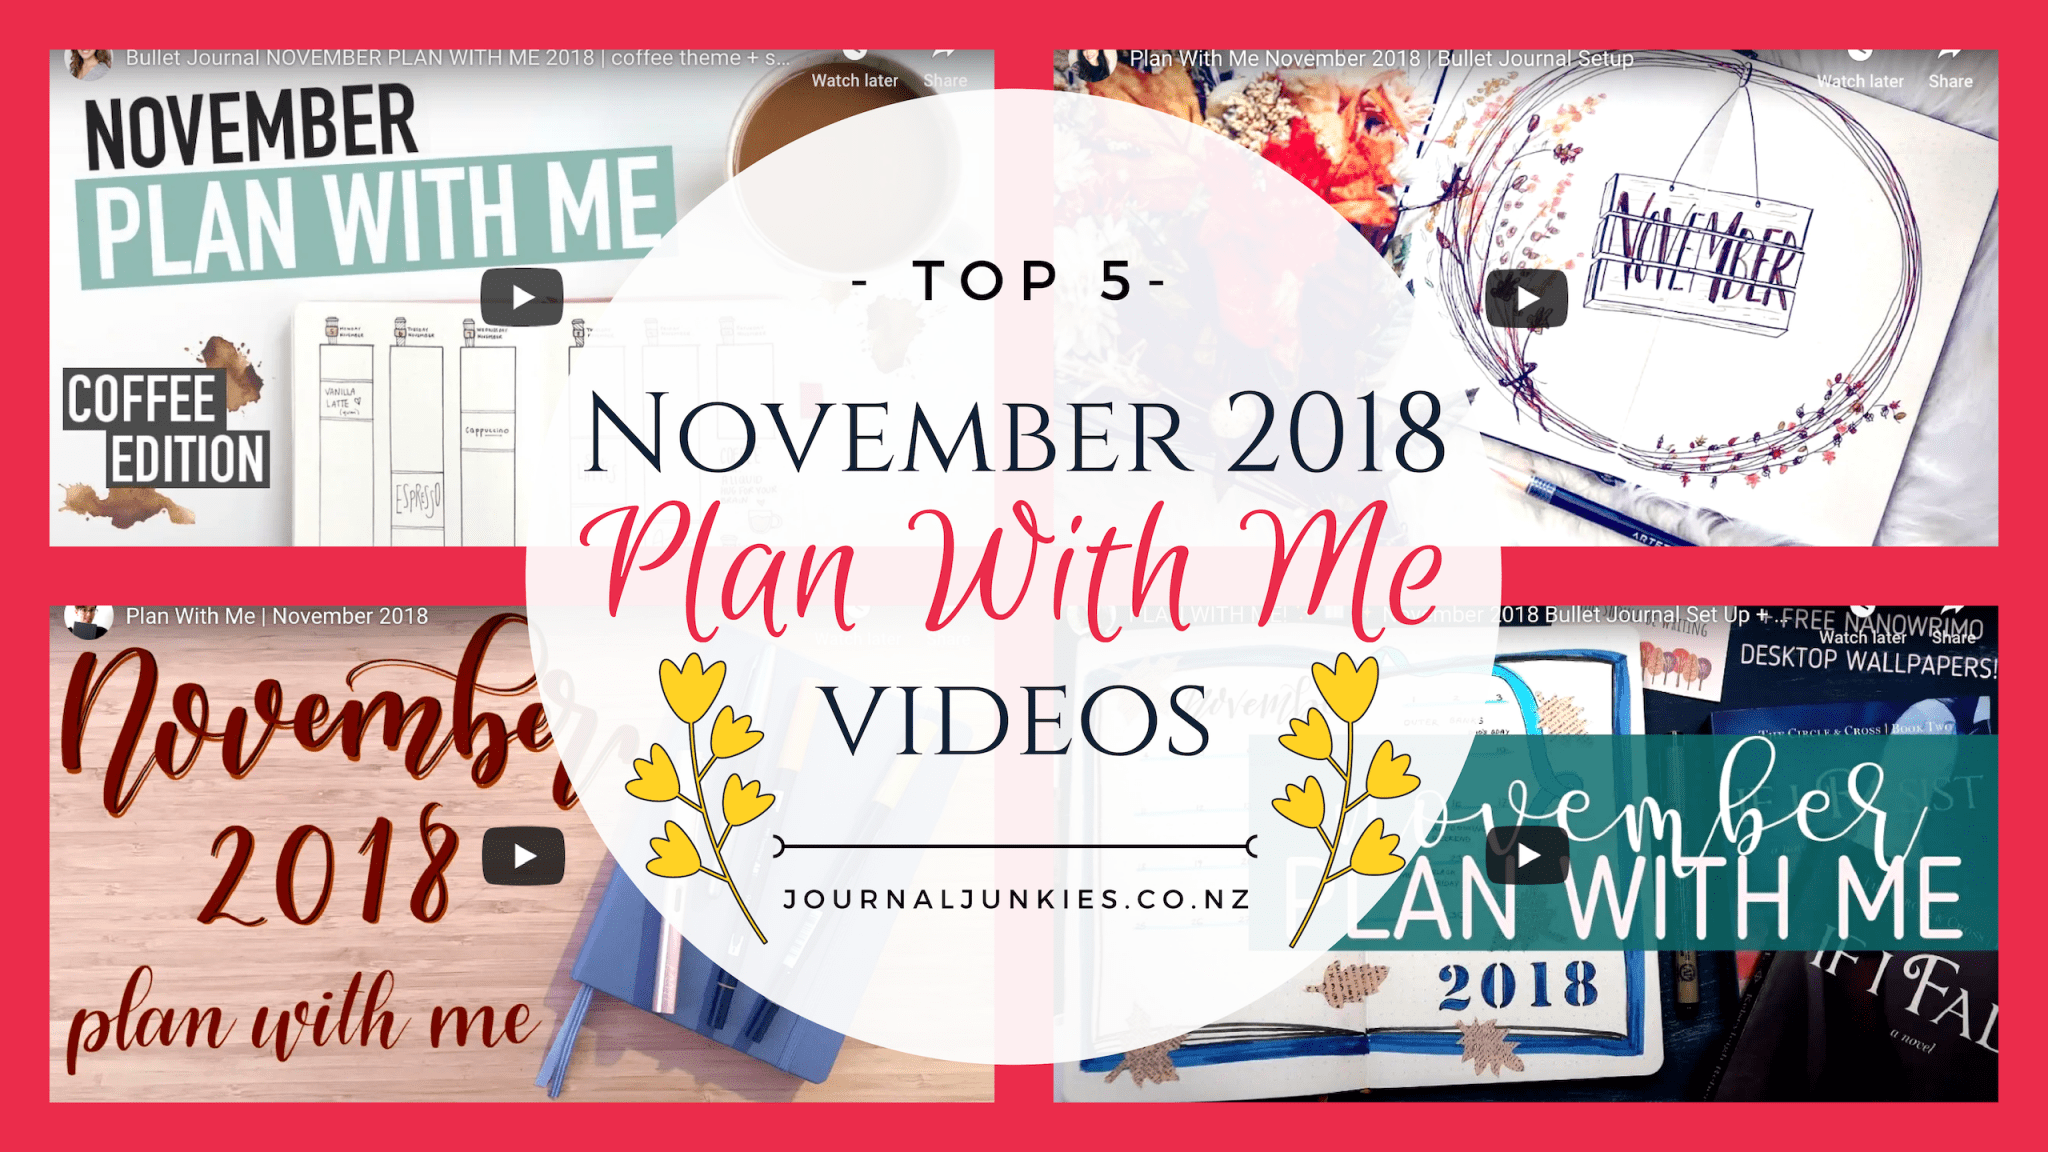 November 2018 Plan With Me | Top 5 Videos for Inspiration